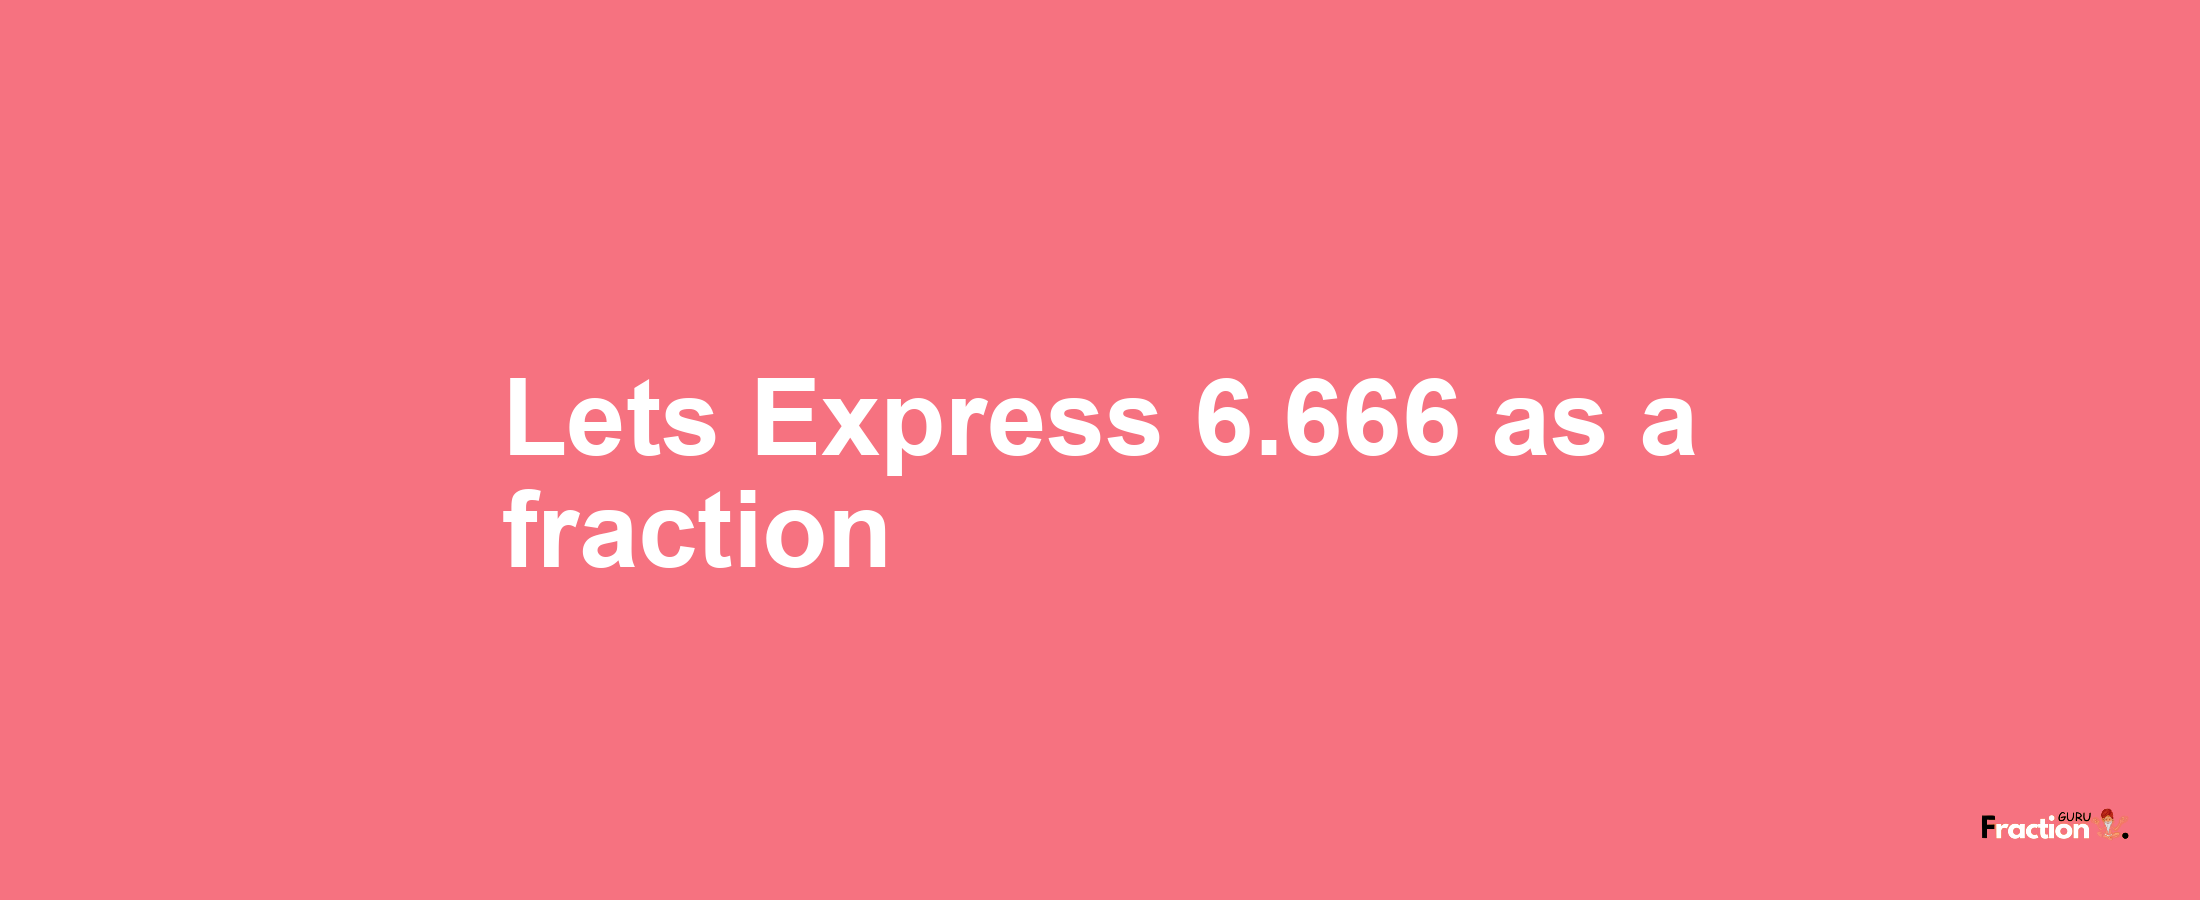 Lets Express 6.666 as afraction